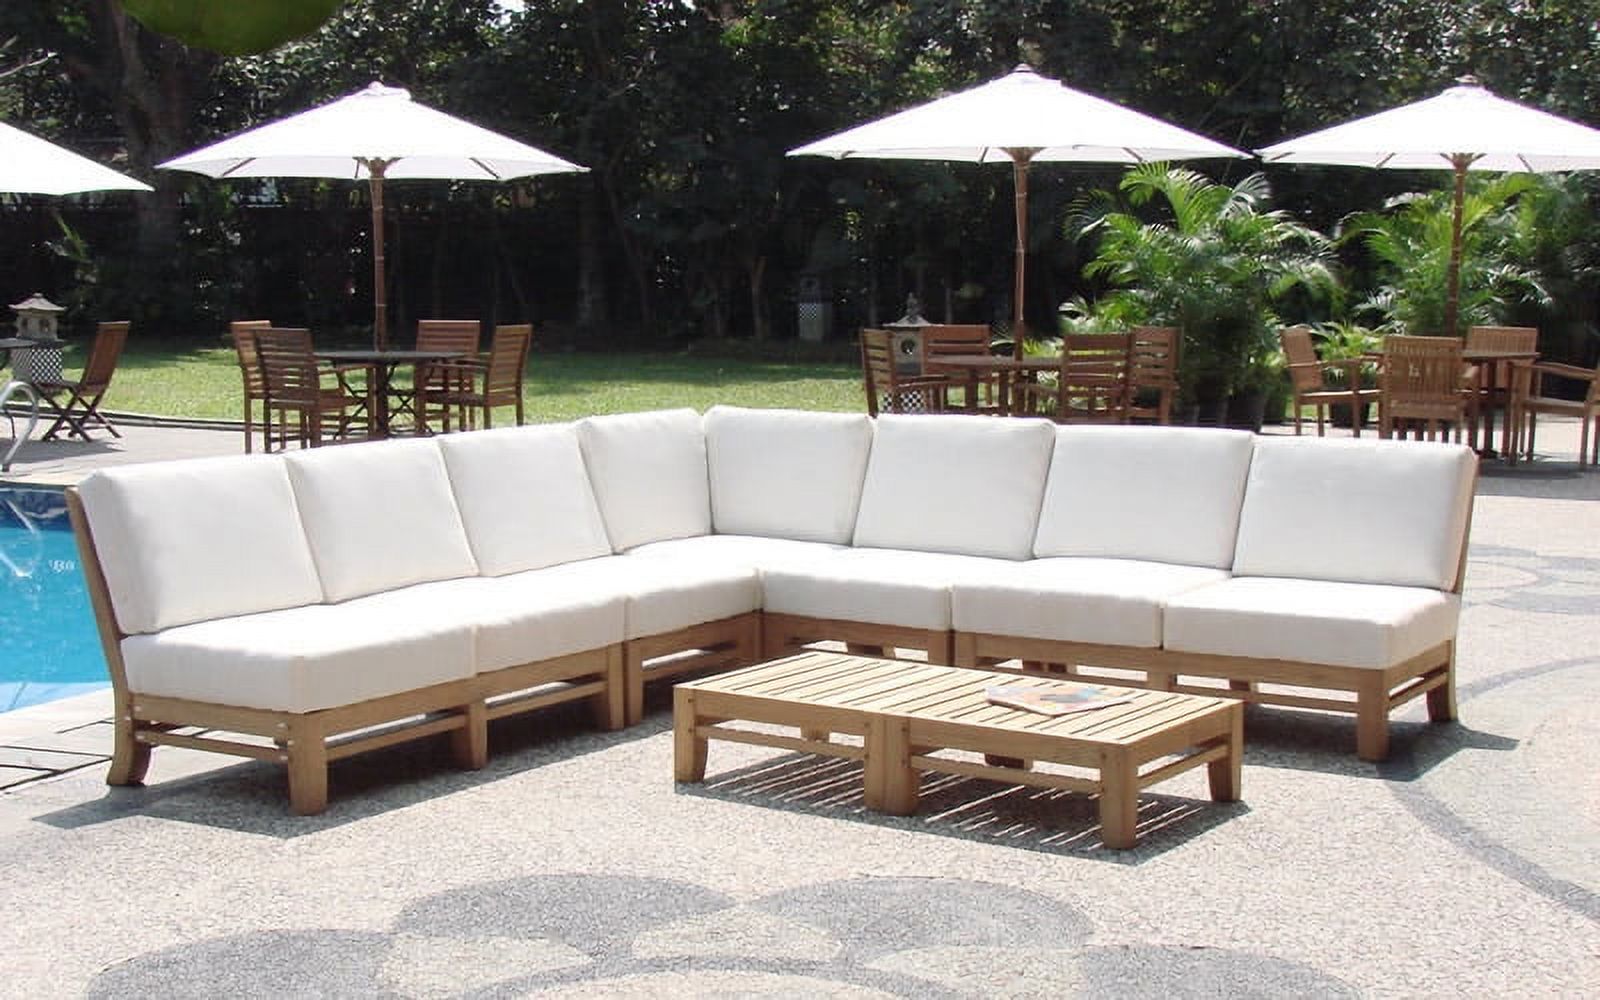 WholesaleTeak Outdoor Patio Grade-A Teak Wood 7 Piece Teak Sectional Sofa Set - 2 Love Seats, 2 Lounge Chair, 1 Corner Pc, 1 Ottoman & 1 Side Table - Furniture only -- Ramled collection #WMSSRM1 - image 2 of 5